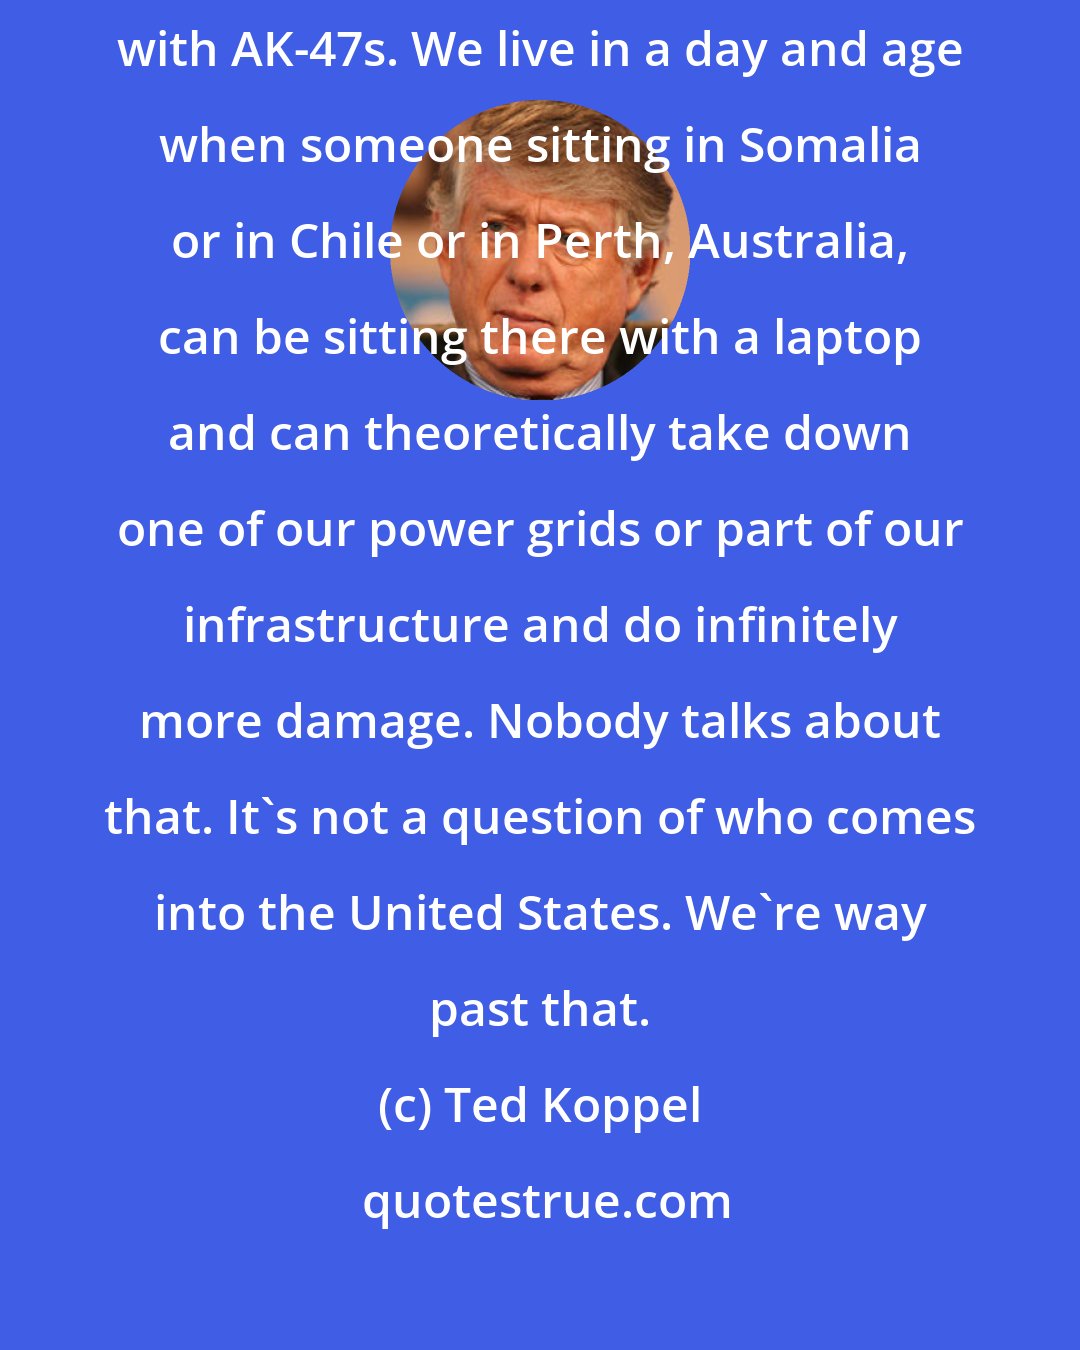 Ted Koppel: The problem is everybody is worrying about explosive vests and people with AK-47s. We live in a day and age when someone sitting in Somalia or in Chile or in Perth, Australia, can be sitting there with a laptop and can theoretically take down one of our power grids or part of our infrastructure and do infinitely more damage. Nobody talks about that. It's not a question of who comes into the United States. We're way past that.